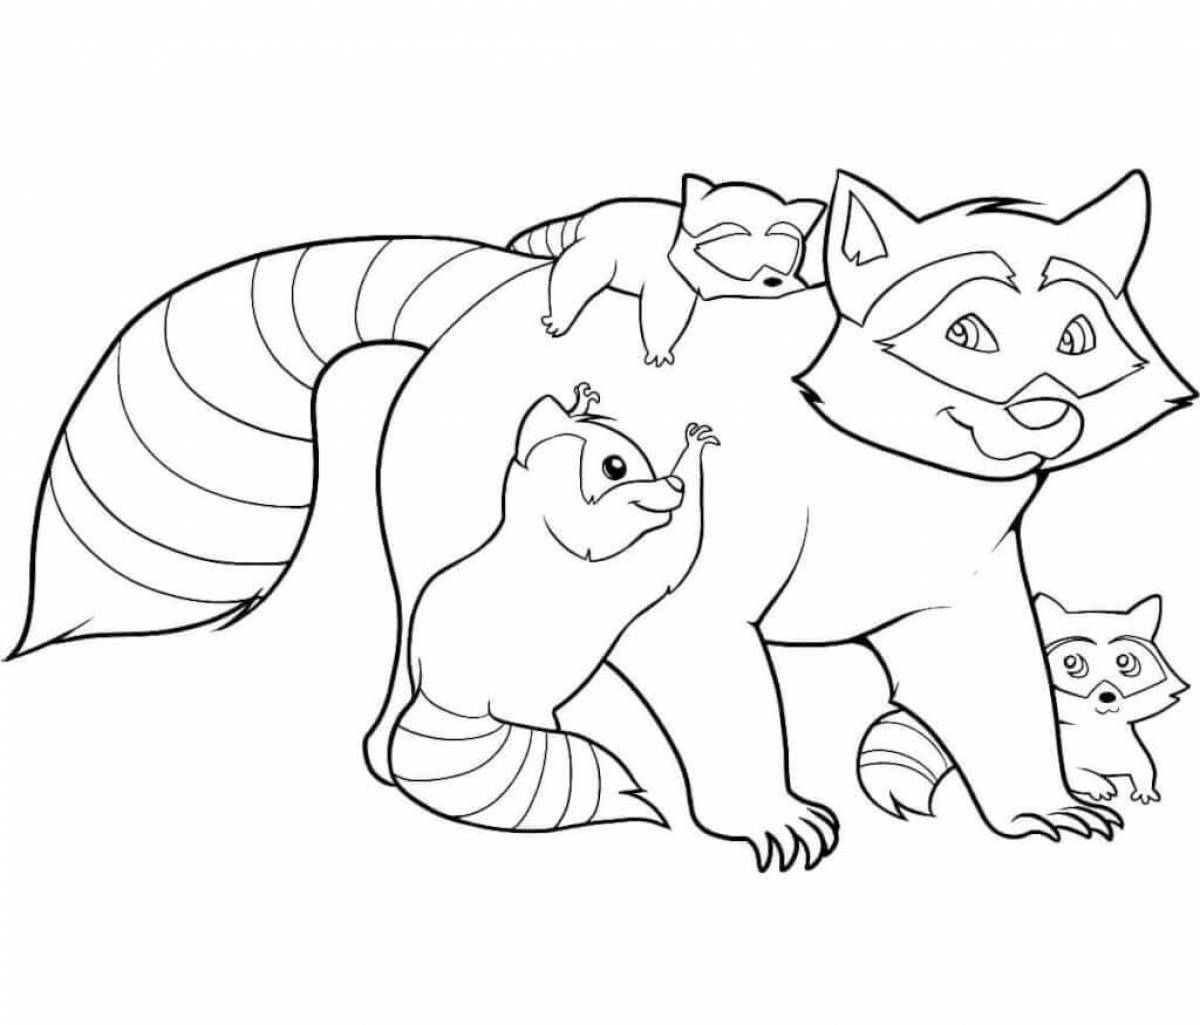 A funny raccoon coloring book for kids